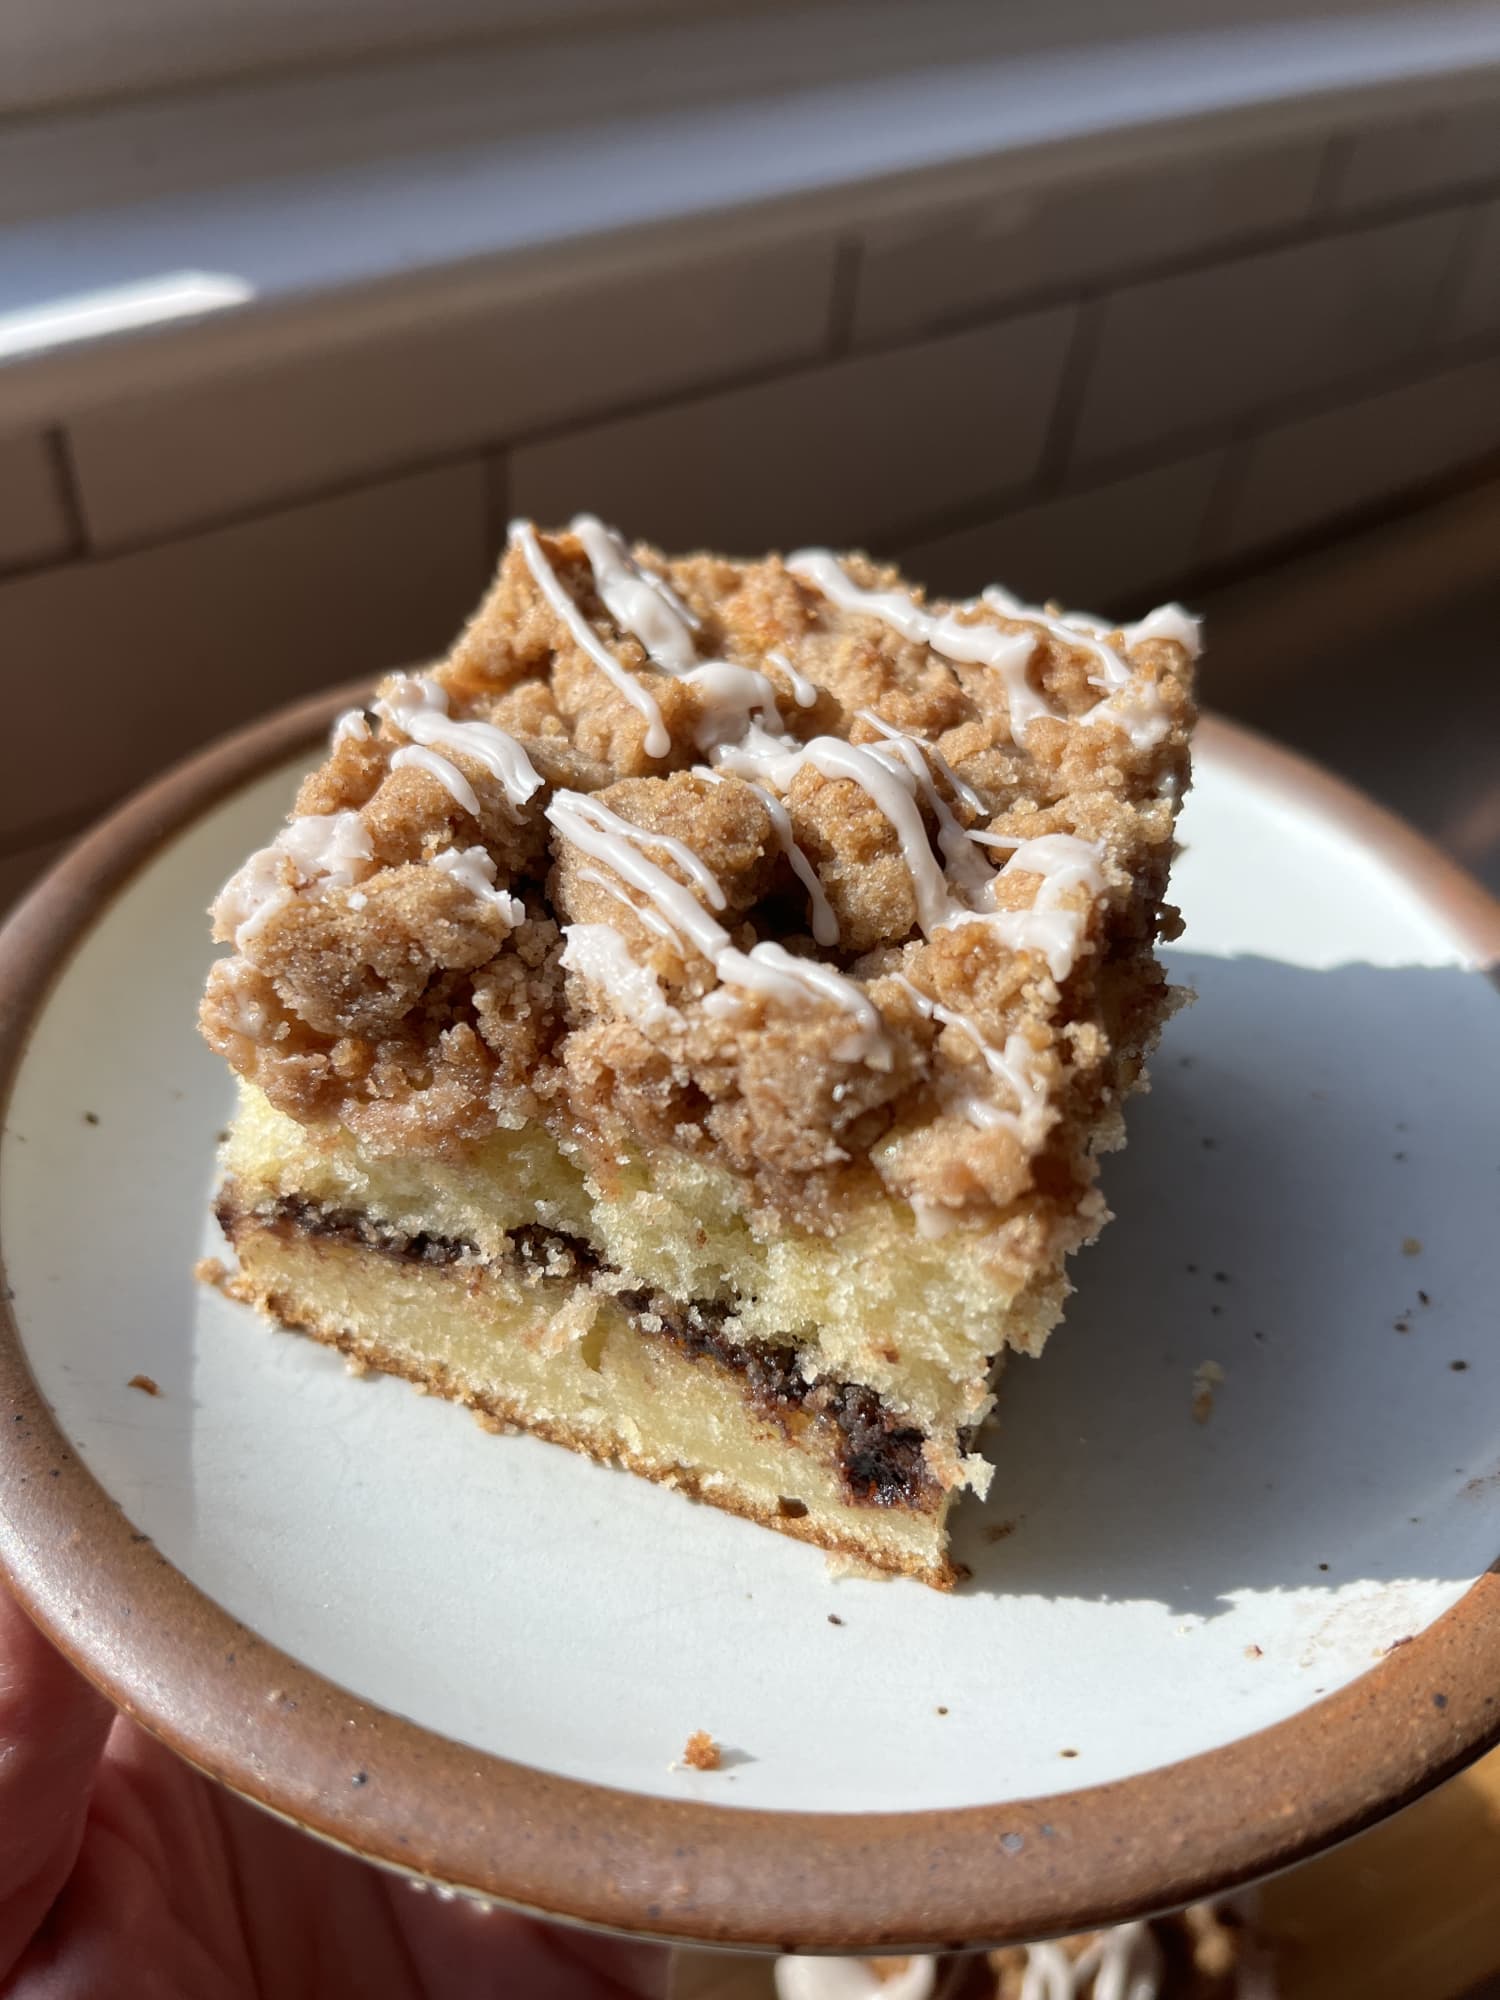 This Top-Rated Cinnamon-Crisp Coffee Cake Is the Best I've Ever Had